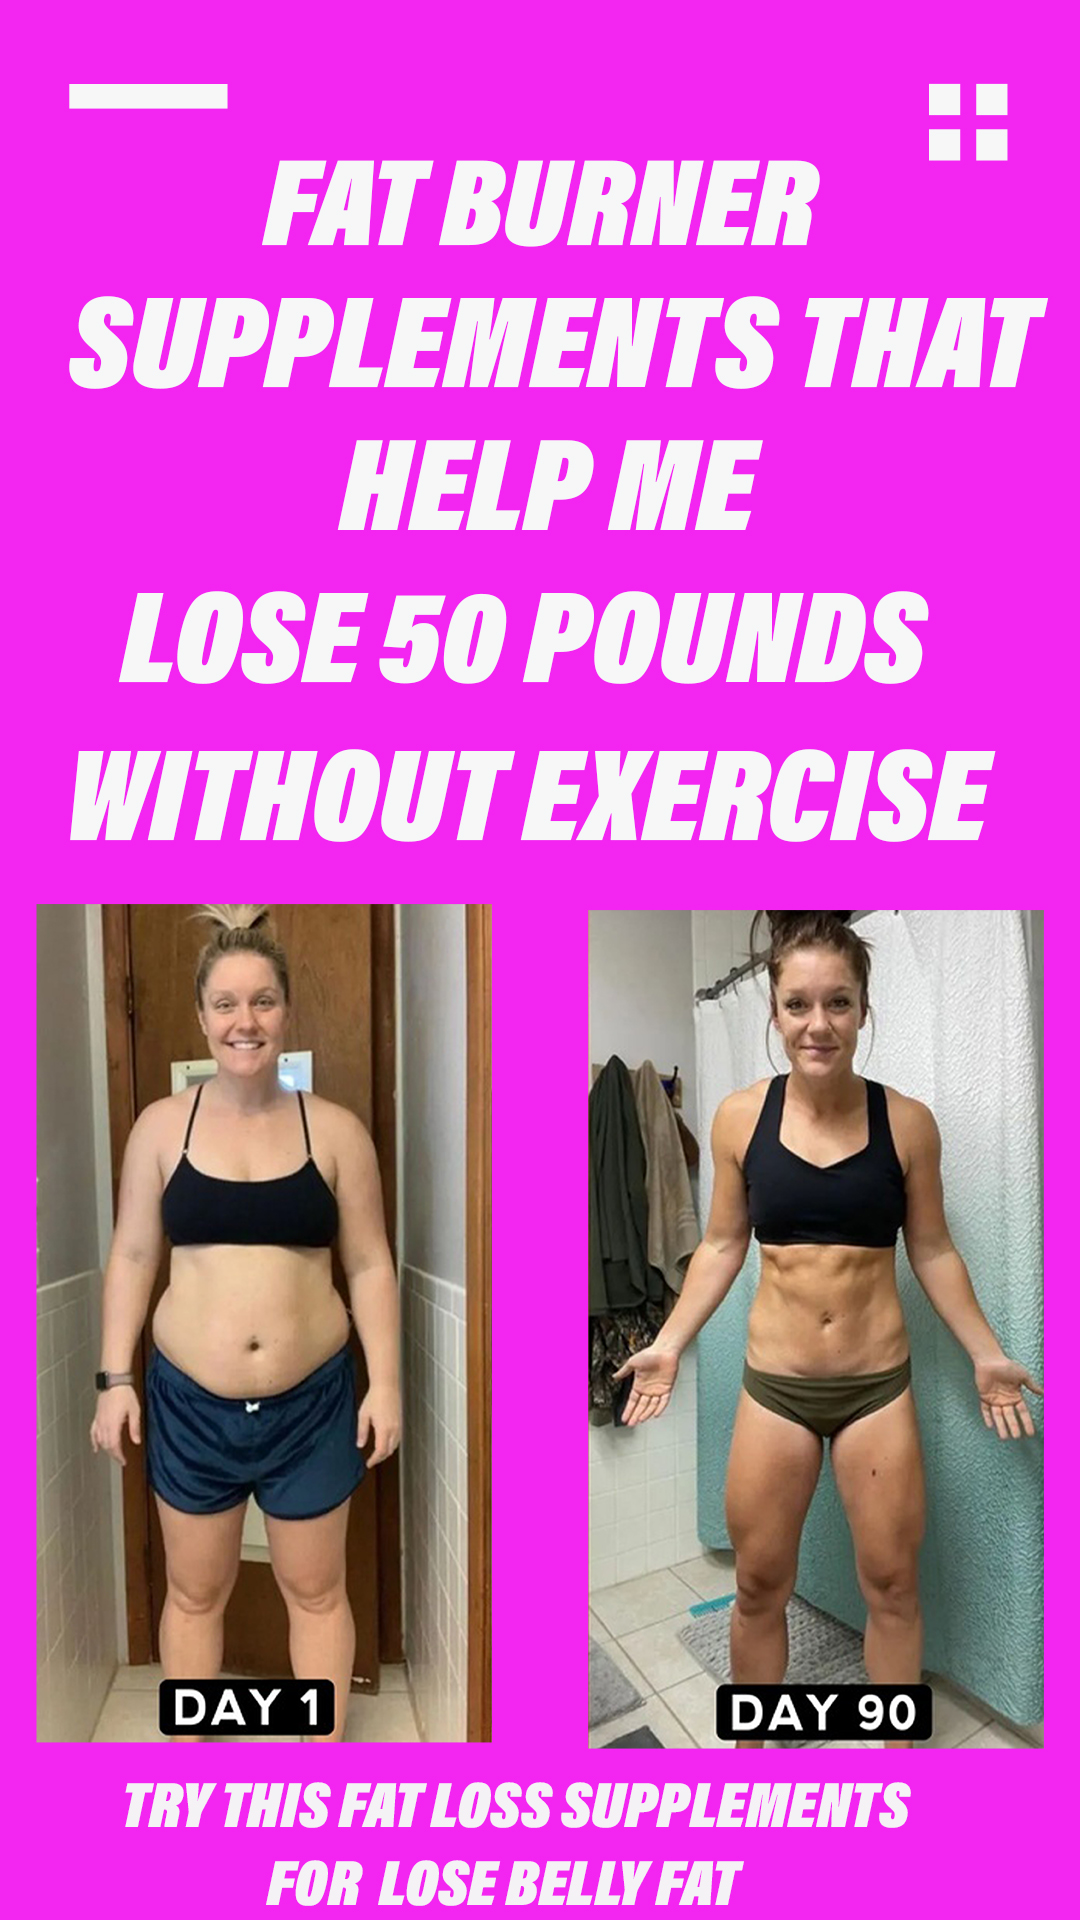 Fat Burner Supplements That Helped Me Lose 50 Pounds Without Exercising